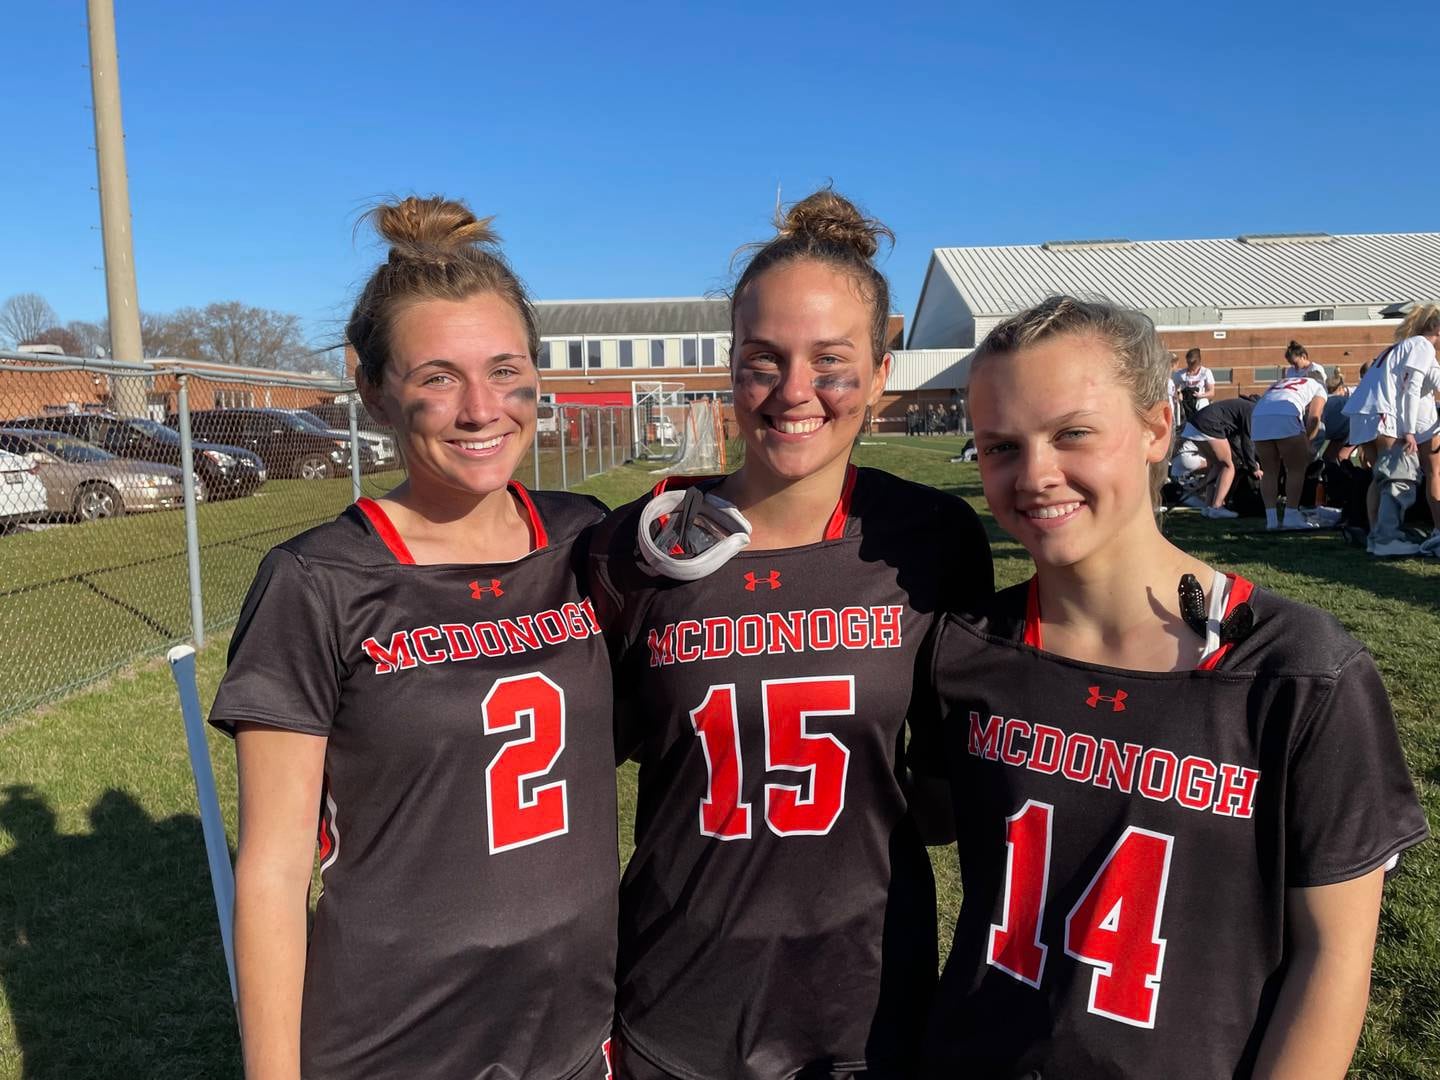 McDonogh midfielders Amanda Lawson (2) and Remi Schaller (15), as well as defender Kit Laake (14), led the No. 3 Eagles to a 13-7 victory at No. 2 Archbishop Spalding Tuesday afternoon. The Eagles remain one of just three teams unbeaten in the IAAM A Conference teams along with No. 1 and two-time defending champion St. Paul's and No. 7 Glenelg Country School. The Eagles host St. Paul's Thursday.